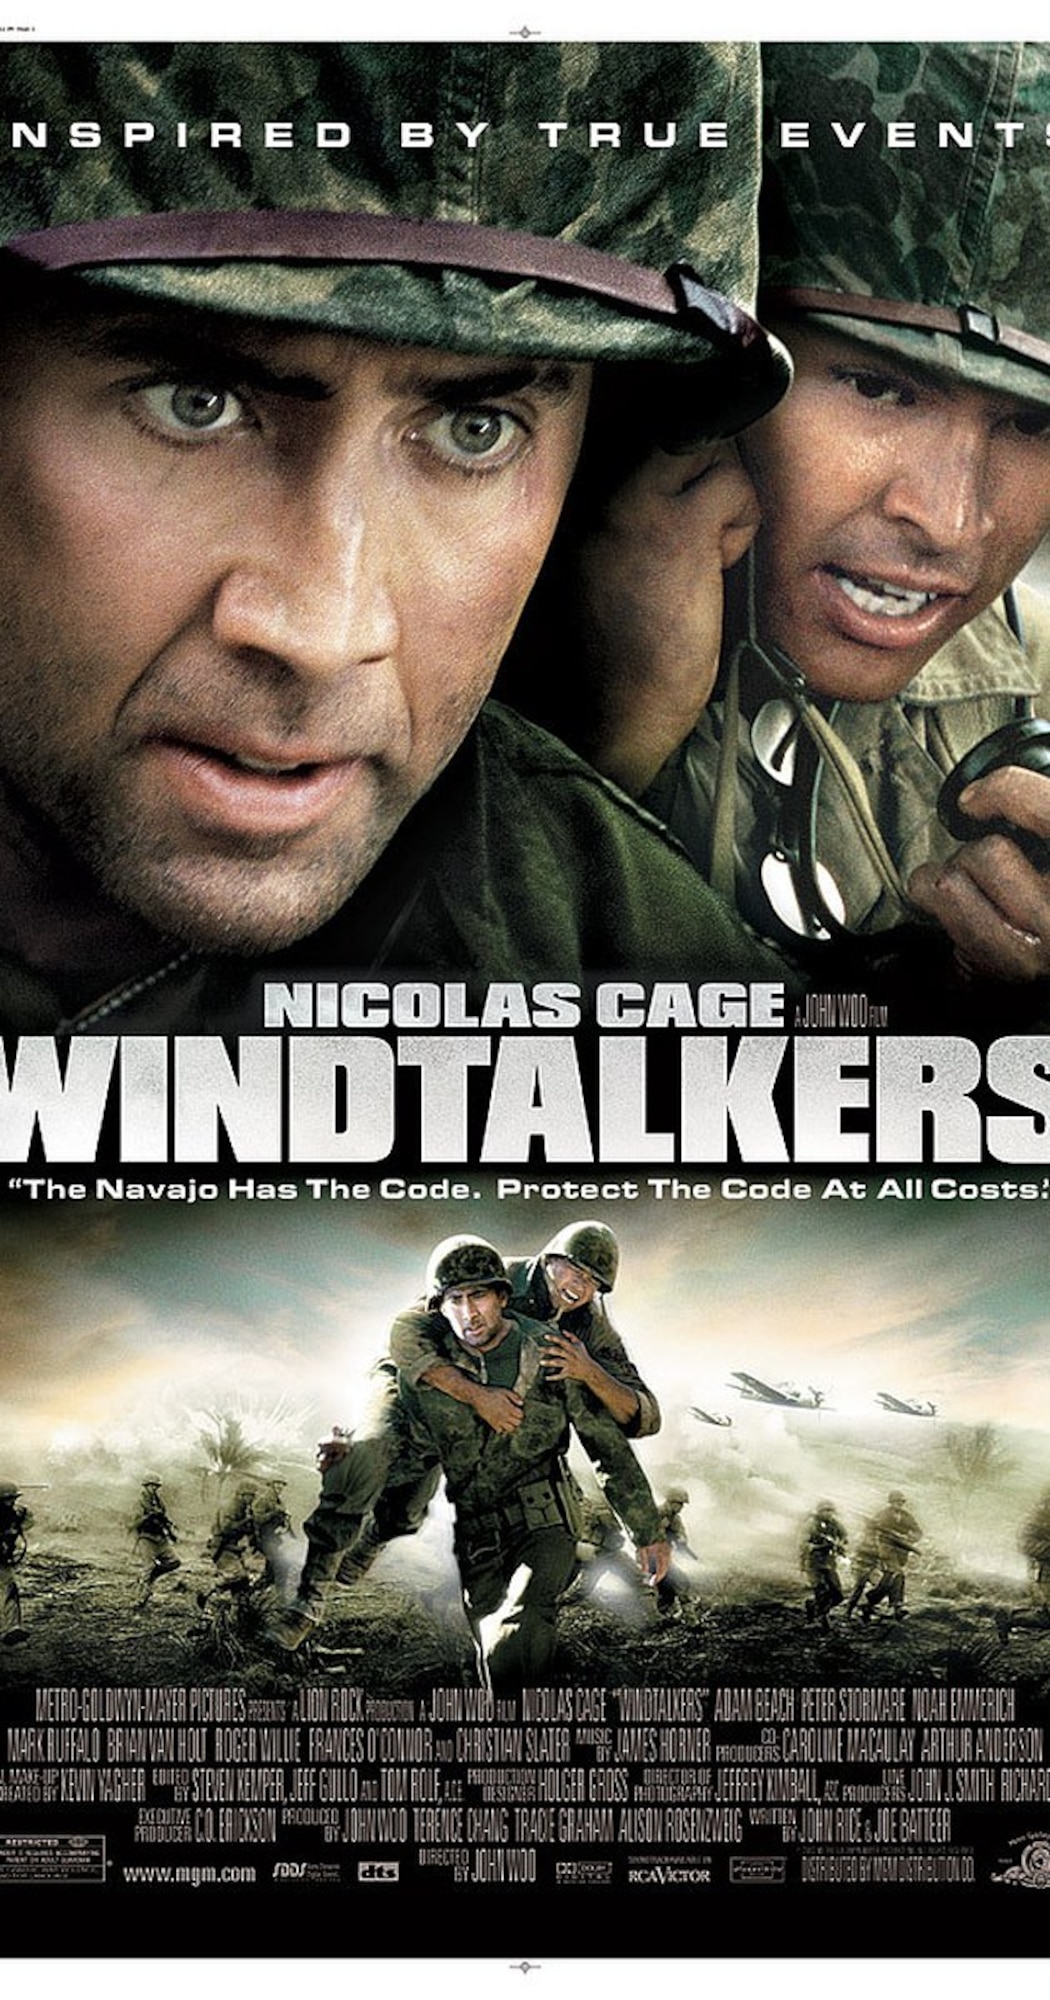 The movie Windtalkers will be shown  at 5 p.m., Thursday, Nov. 10, in the base theater. Admission is free.